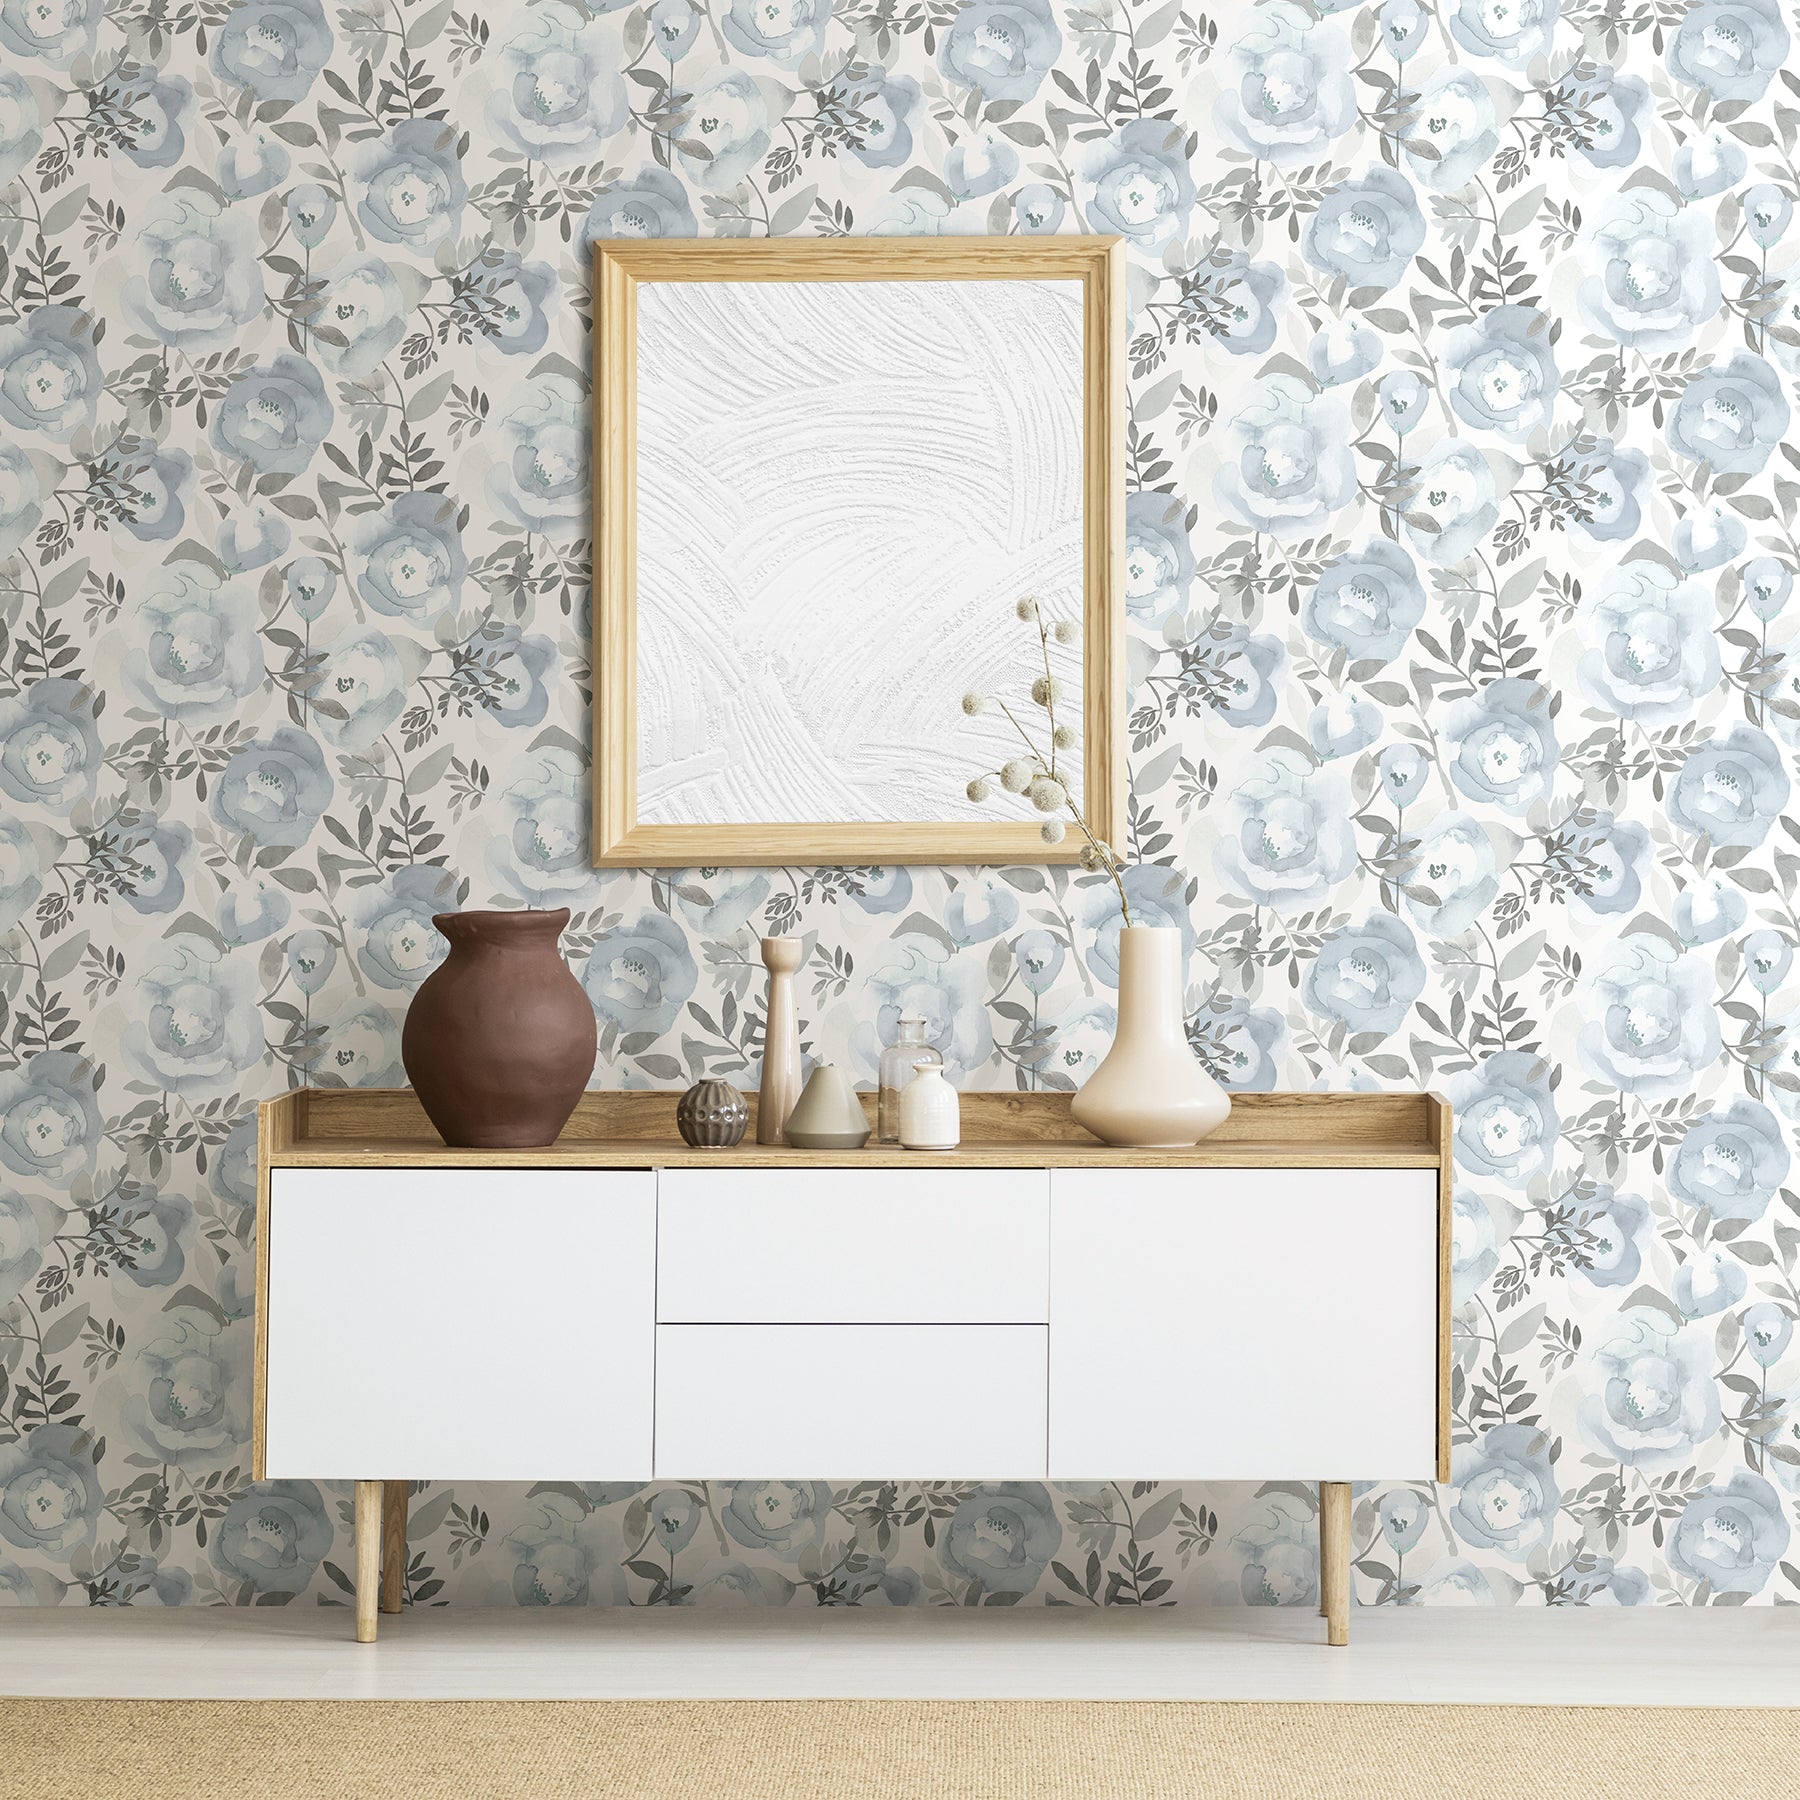 Acquire 2903-25841 Blue Bell Orla Blue Floral A Street Prints Wallpaper